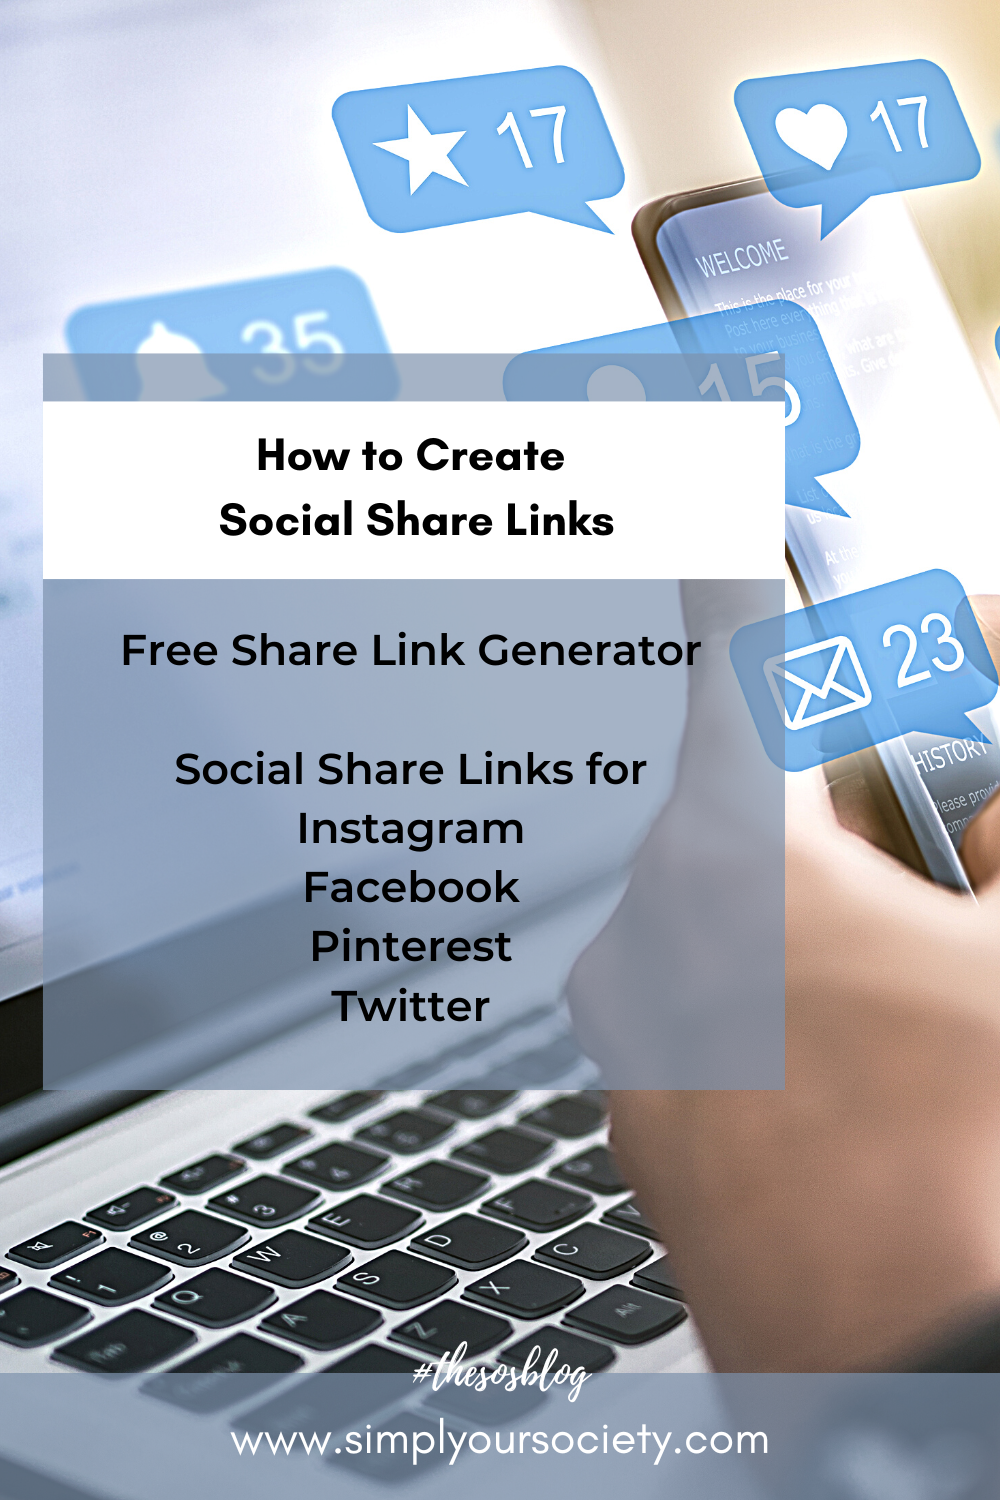 pinterest pin picture of laptop with person's hands holding smartphone and social share icons coming out from phone, share link generator, share links generator, social share links, create social sharing, linkedin share links, facebook share links, create share links, instagram share links